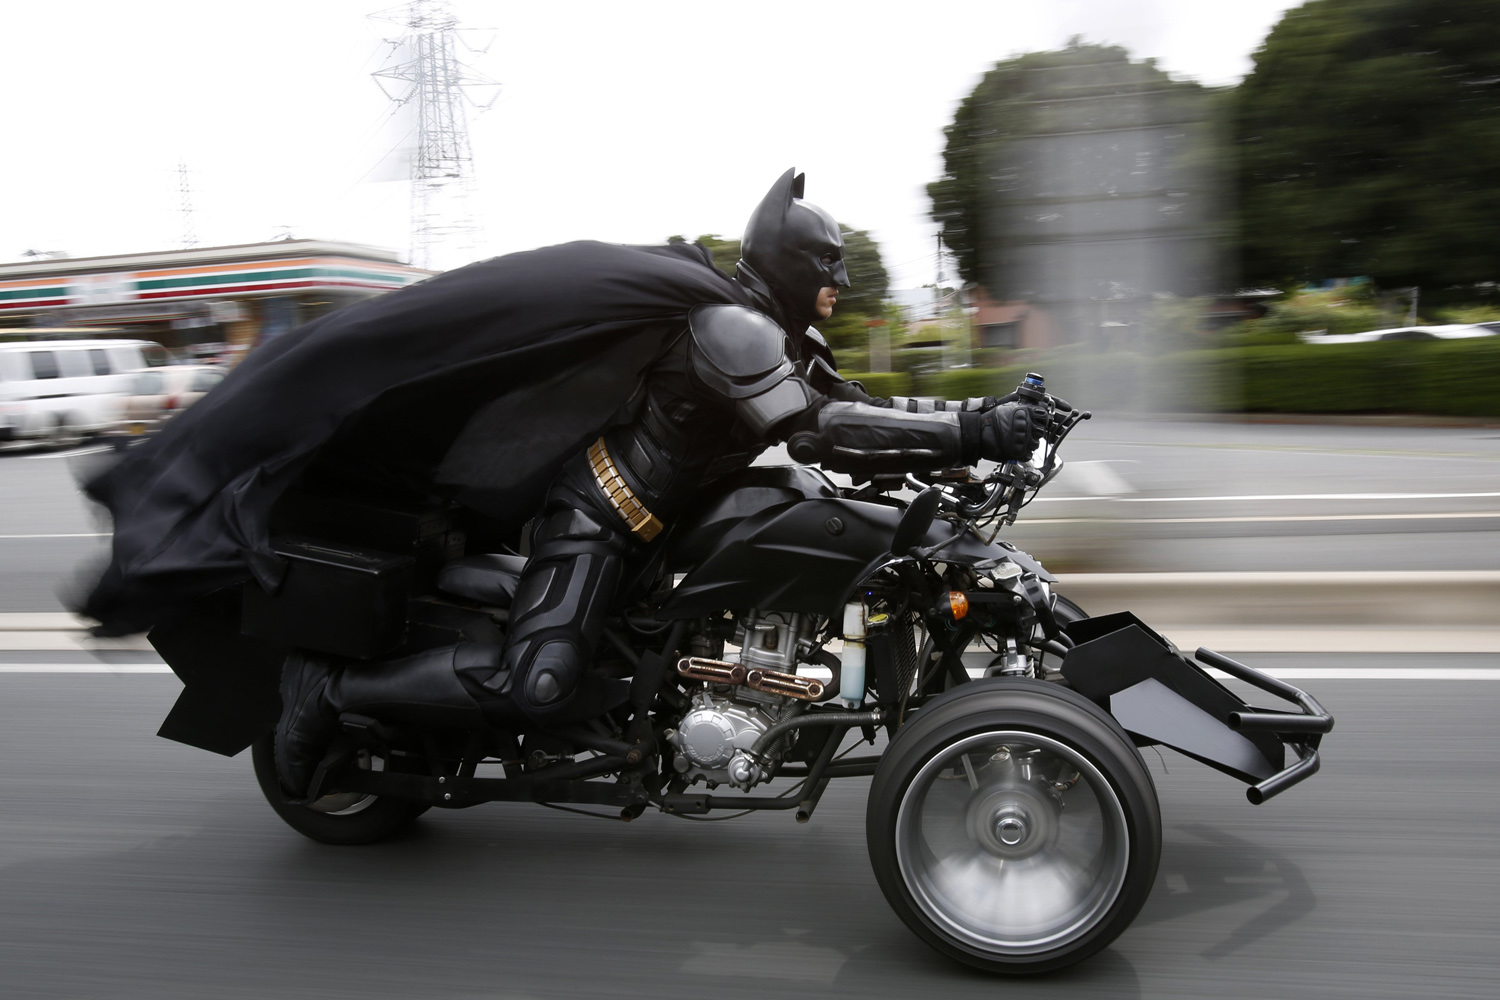 A 41-year-old man going by the name of Chibatman rides his  Chibatpod  on the road in Chiba, east of Tokyo, on Aug. 31, 2014.